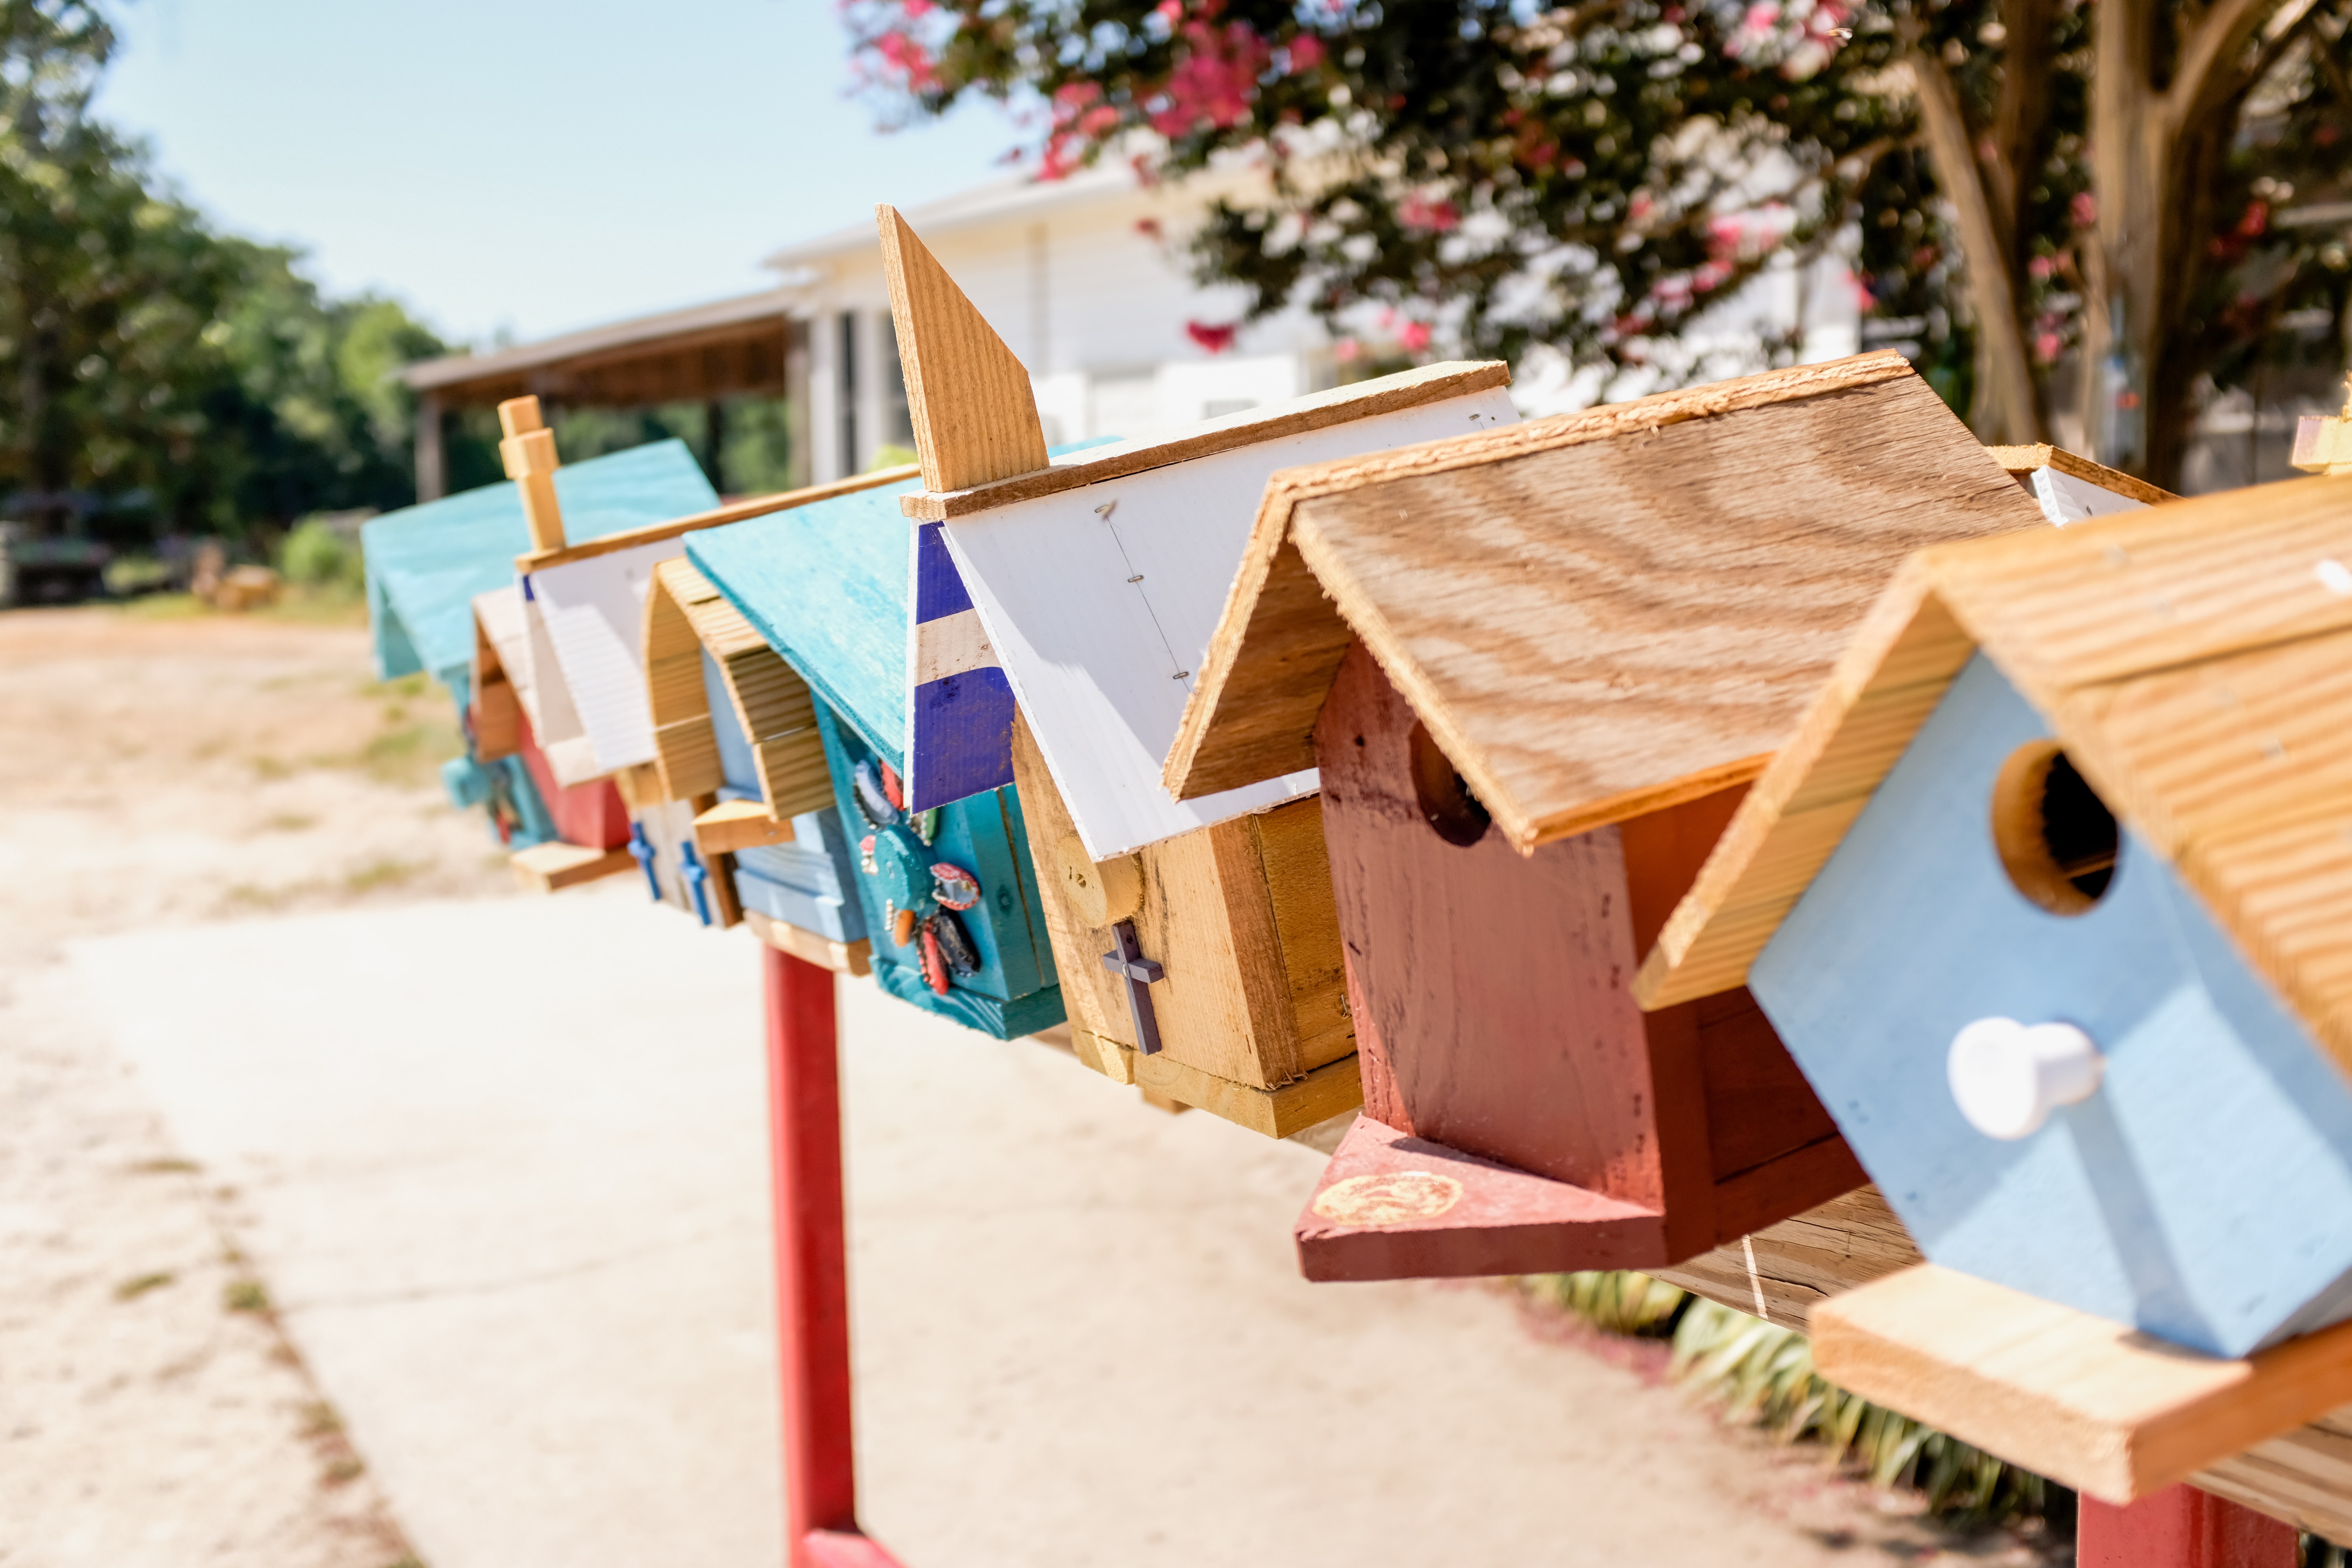 Colored bird houses